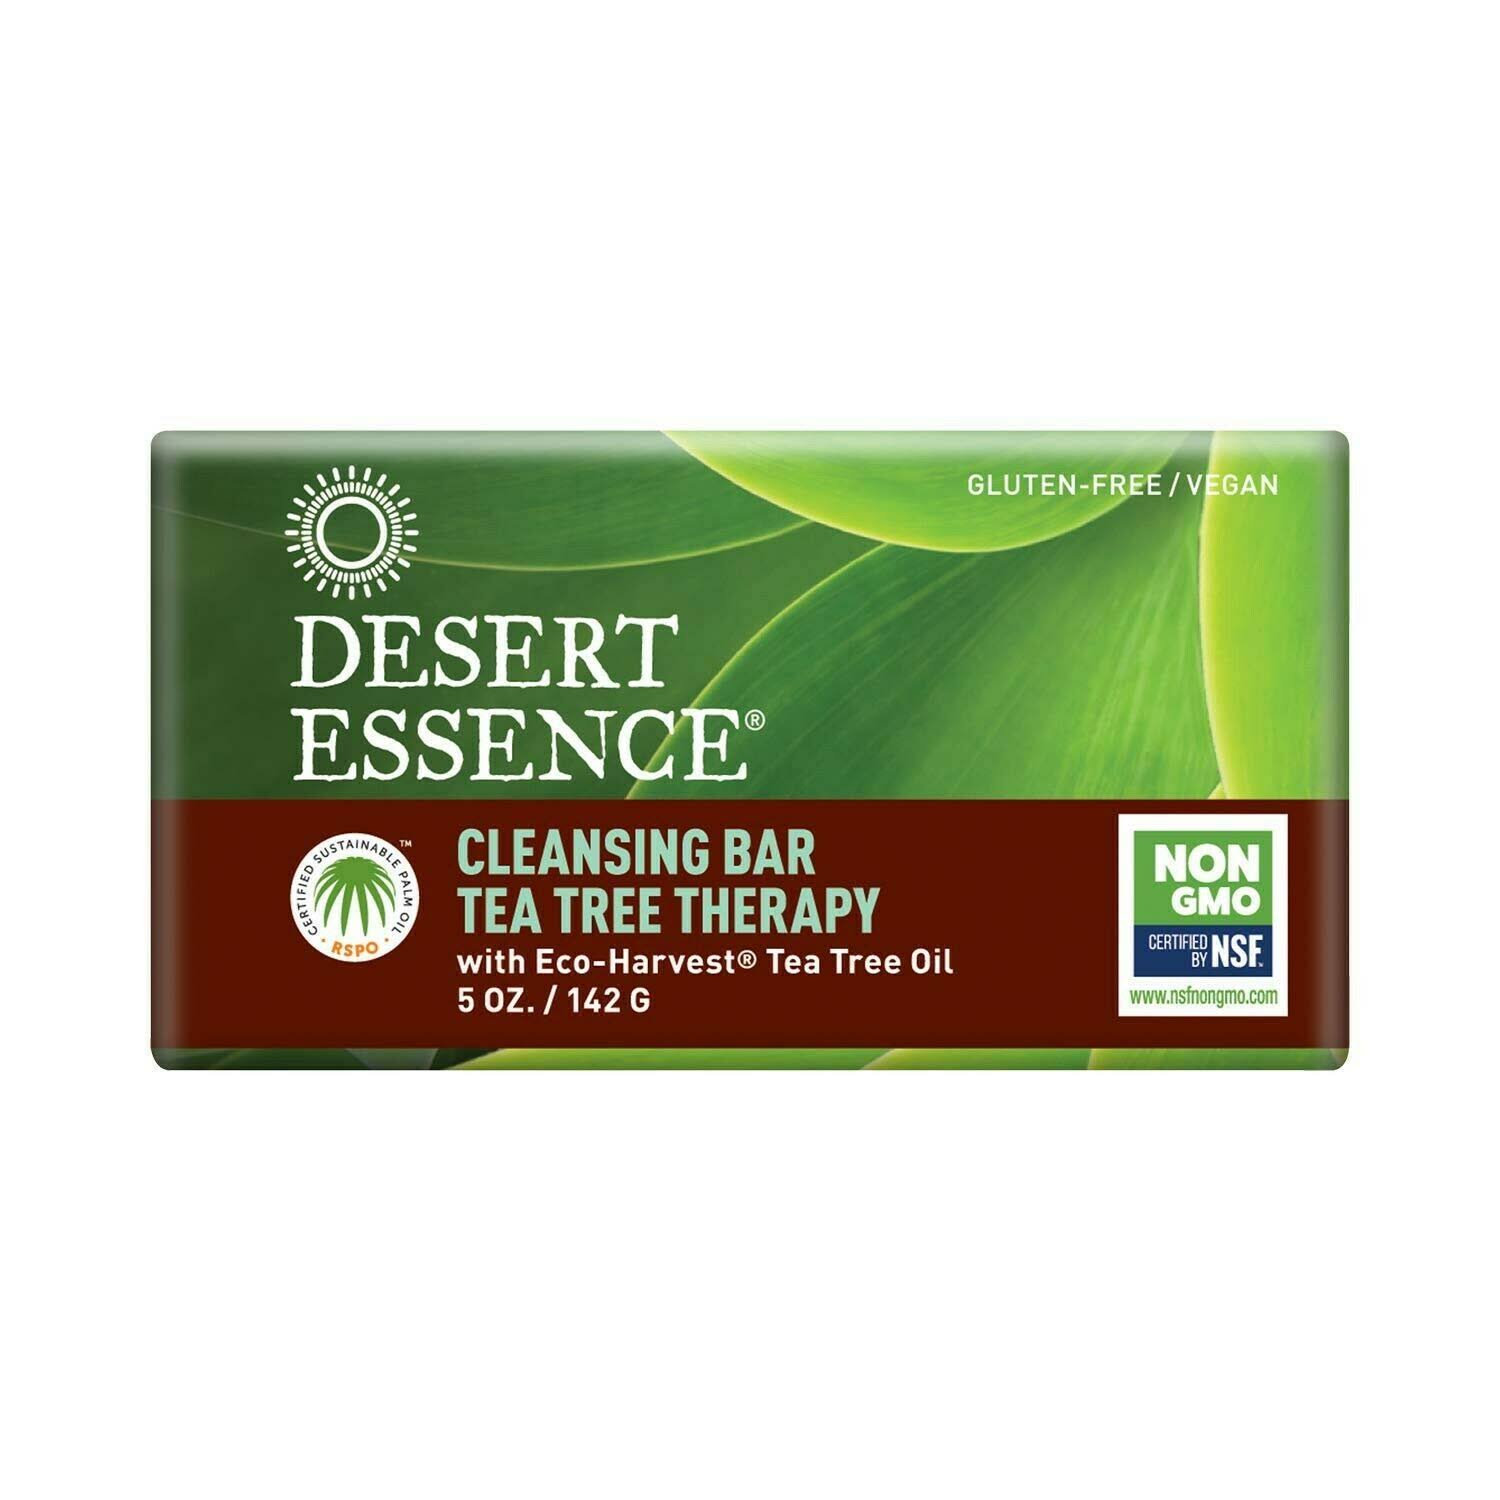 Desert Essence Tea Tree Therapy Cleansing Bar Soap - 5oz